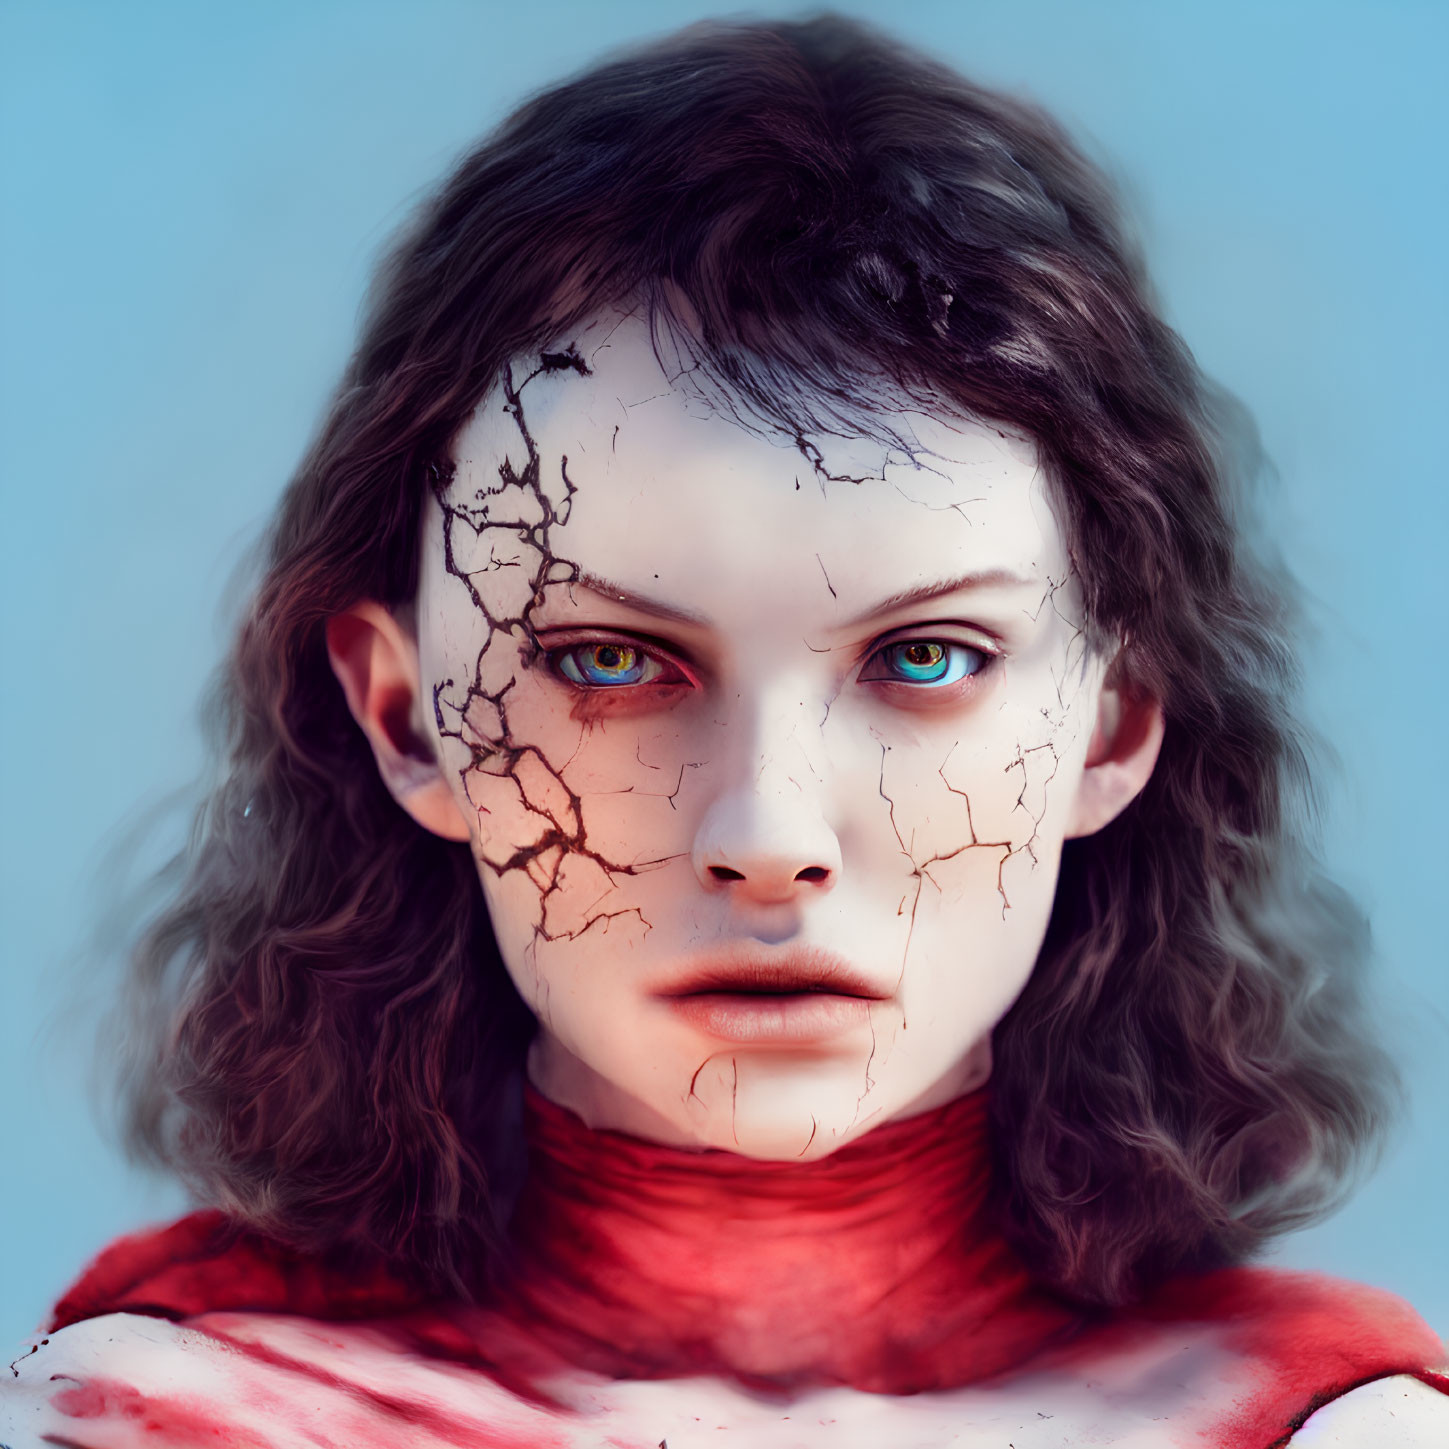 Person with cracked porcelain skin and blue eyes in red clothing on blue background